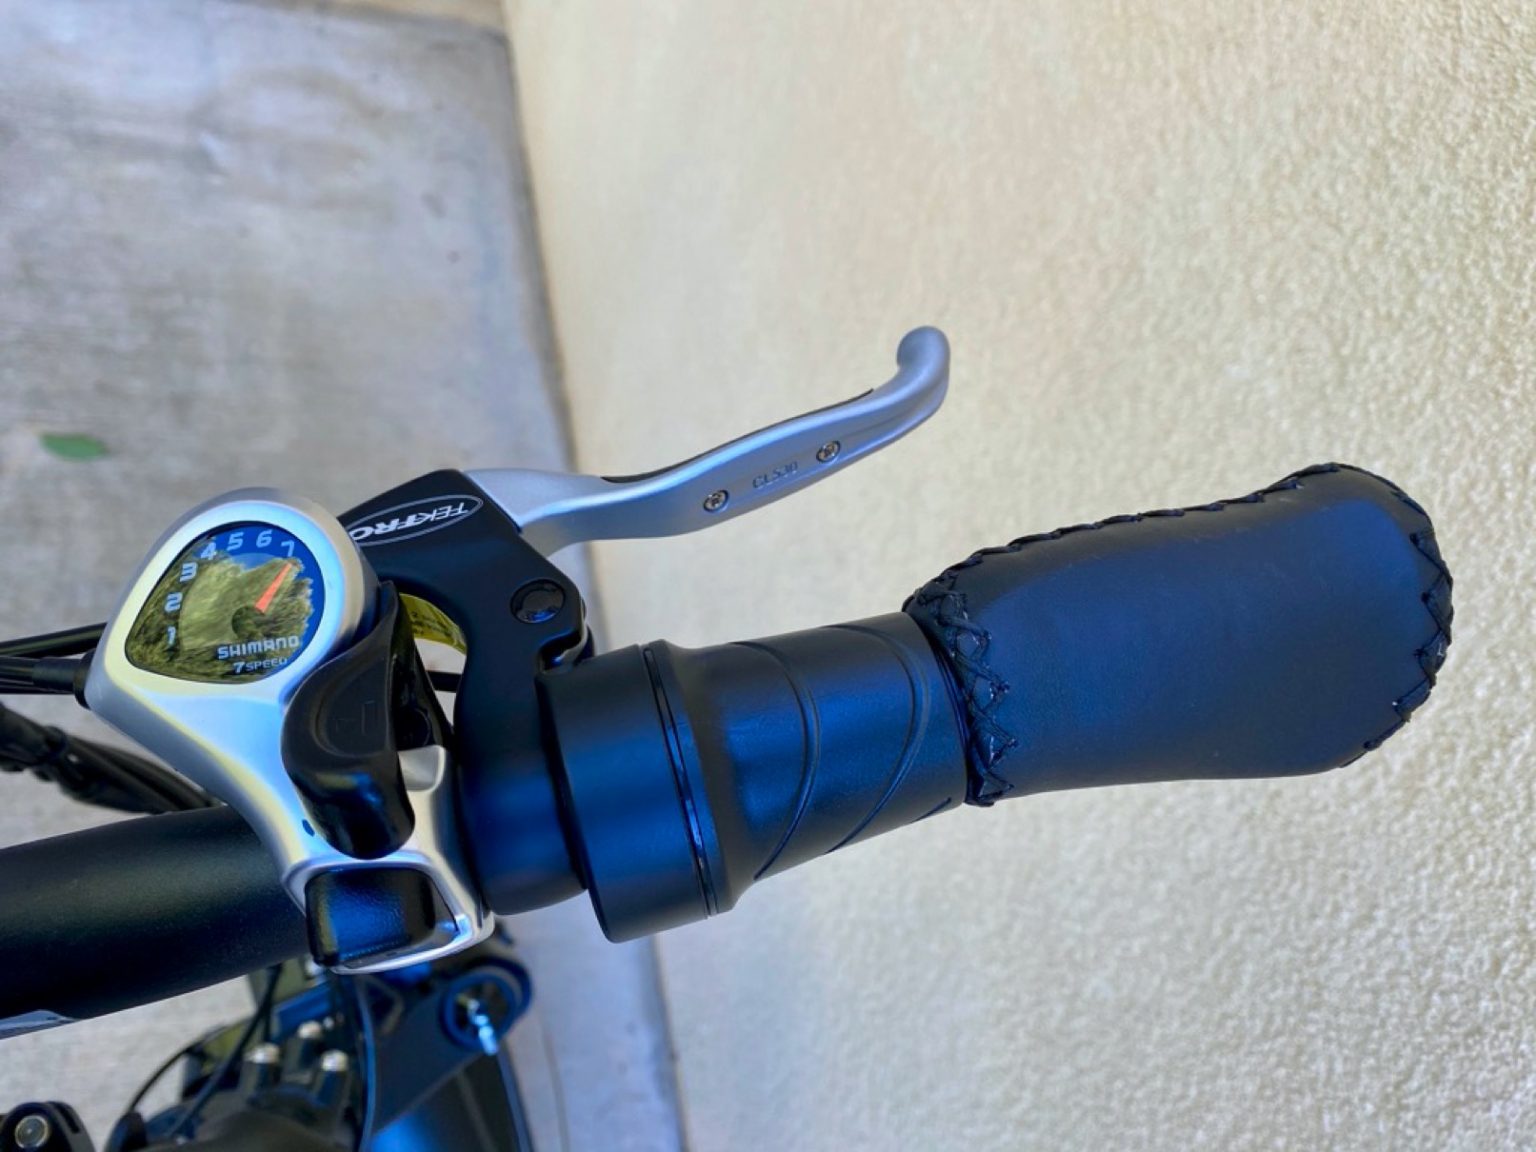 The throttle is on the handlebar and it makes your e-bike move forward quickly